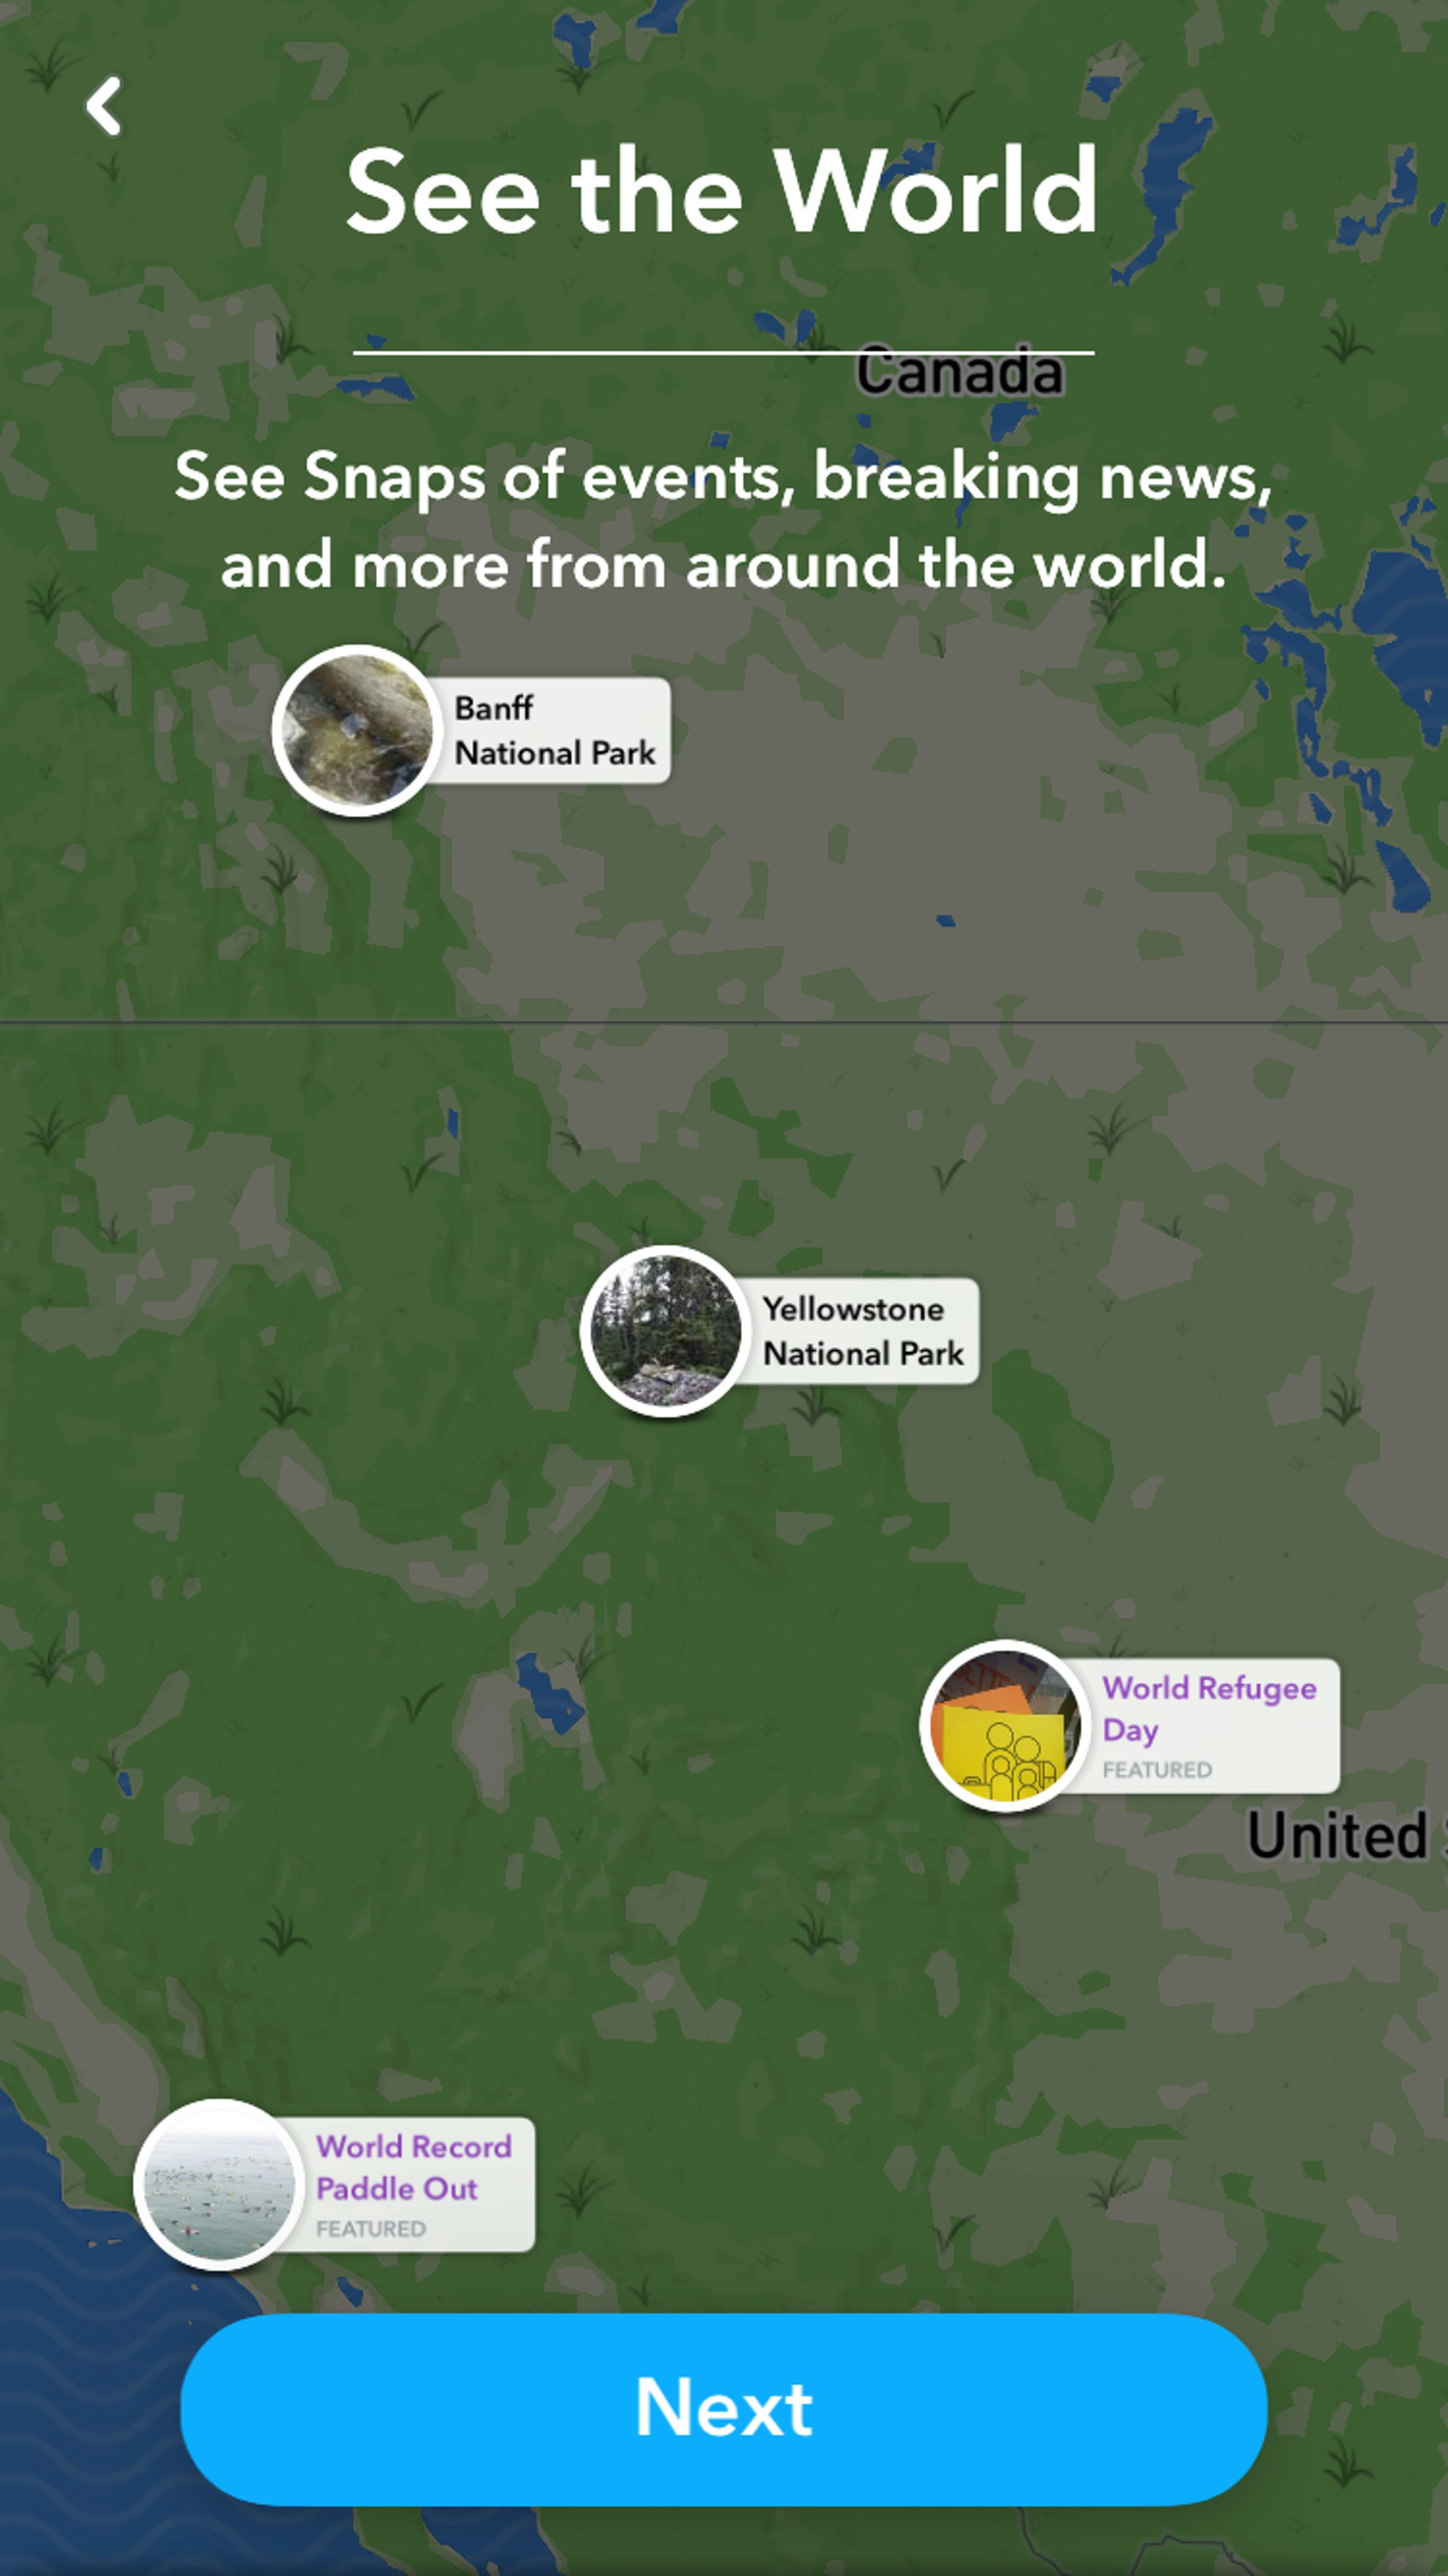 snap map not working